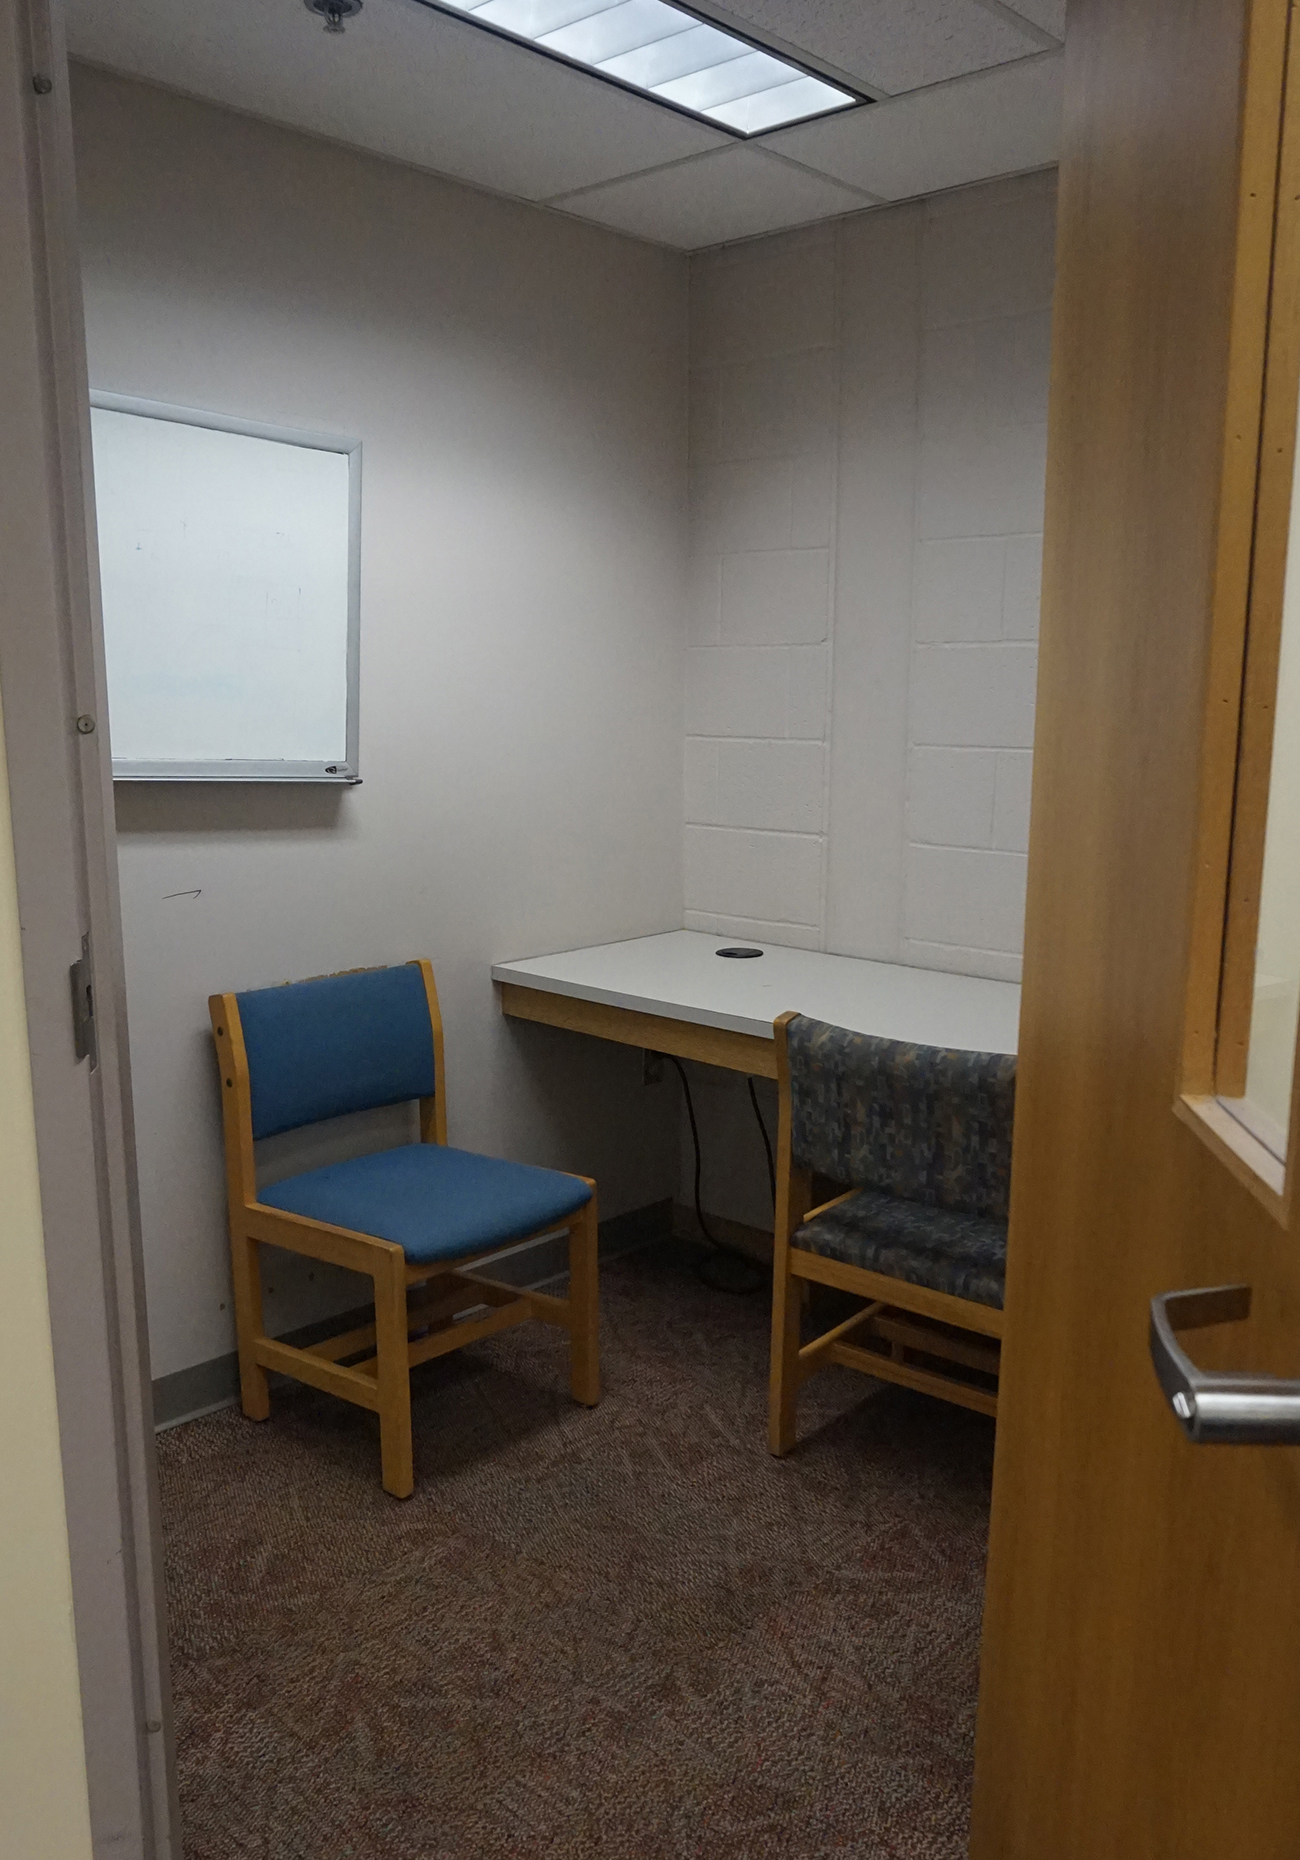 North Carroll Tutor Room with seating for two